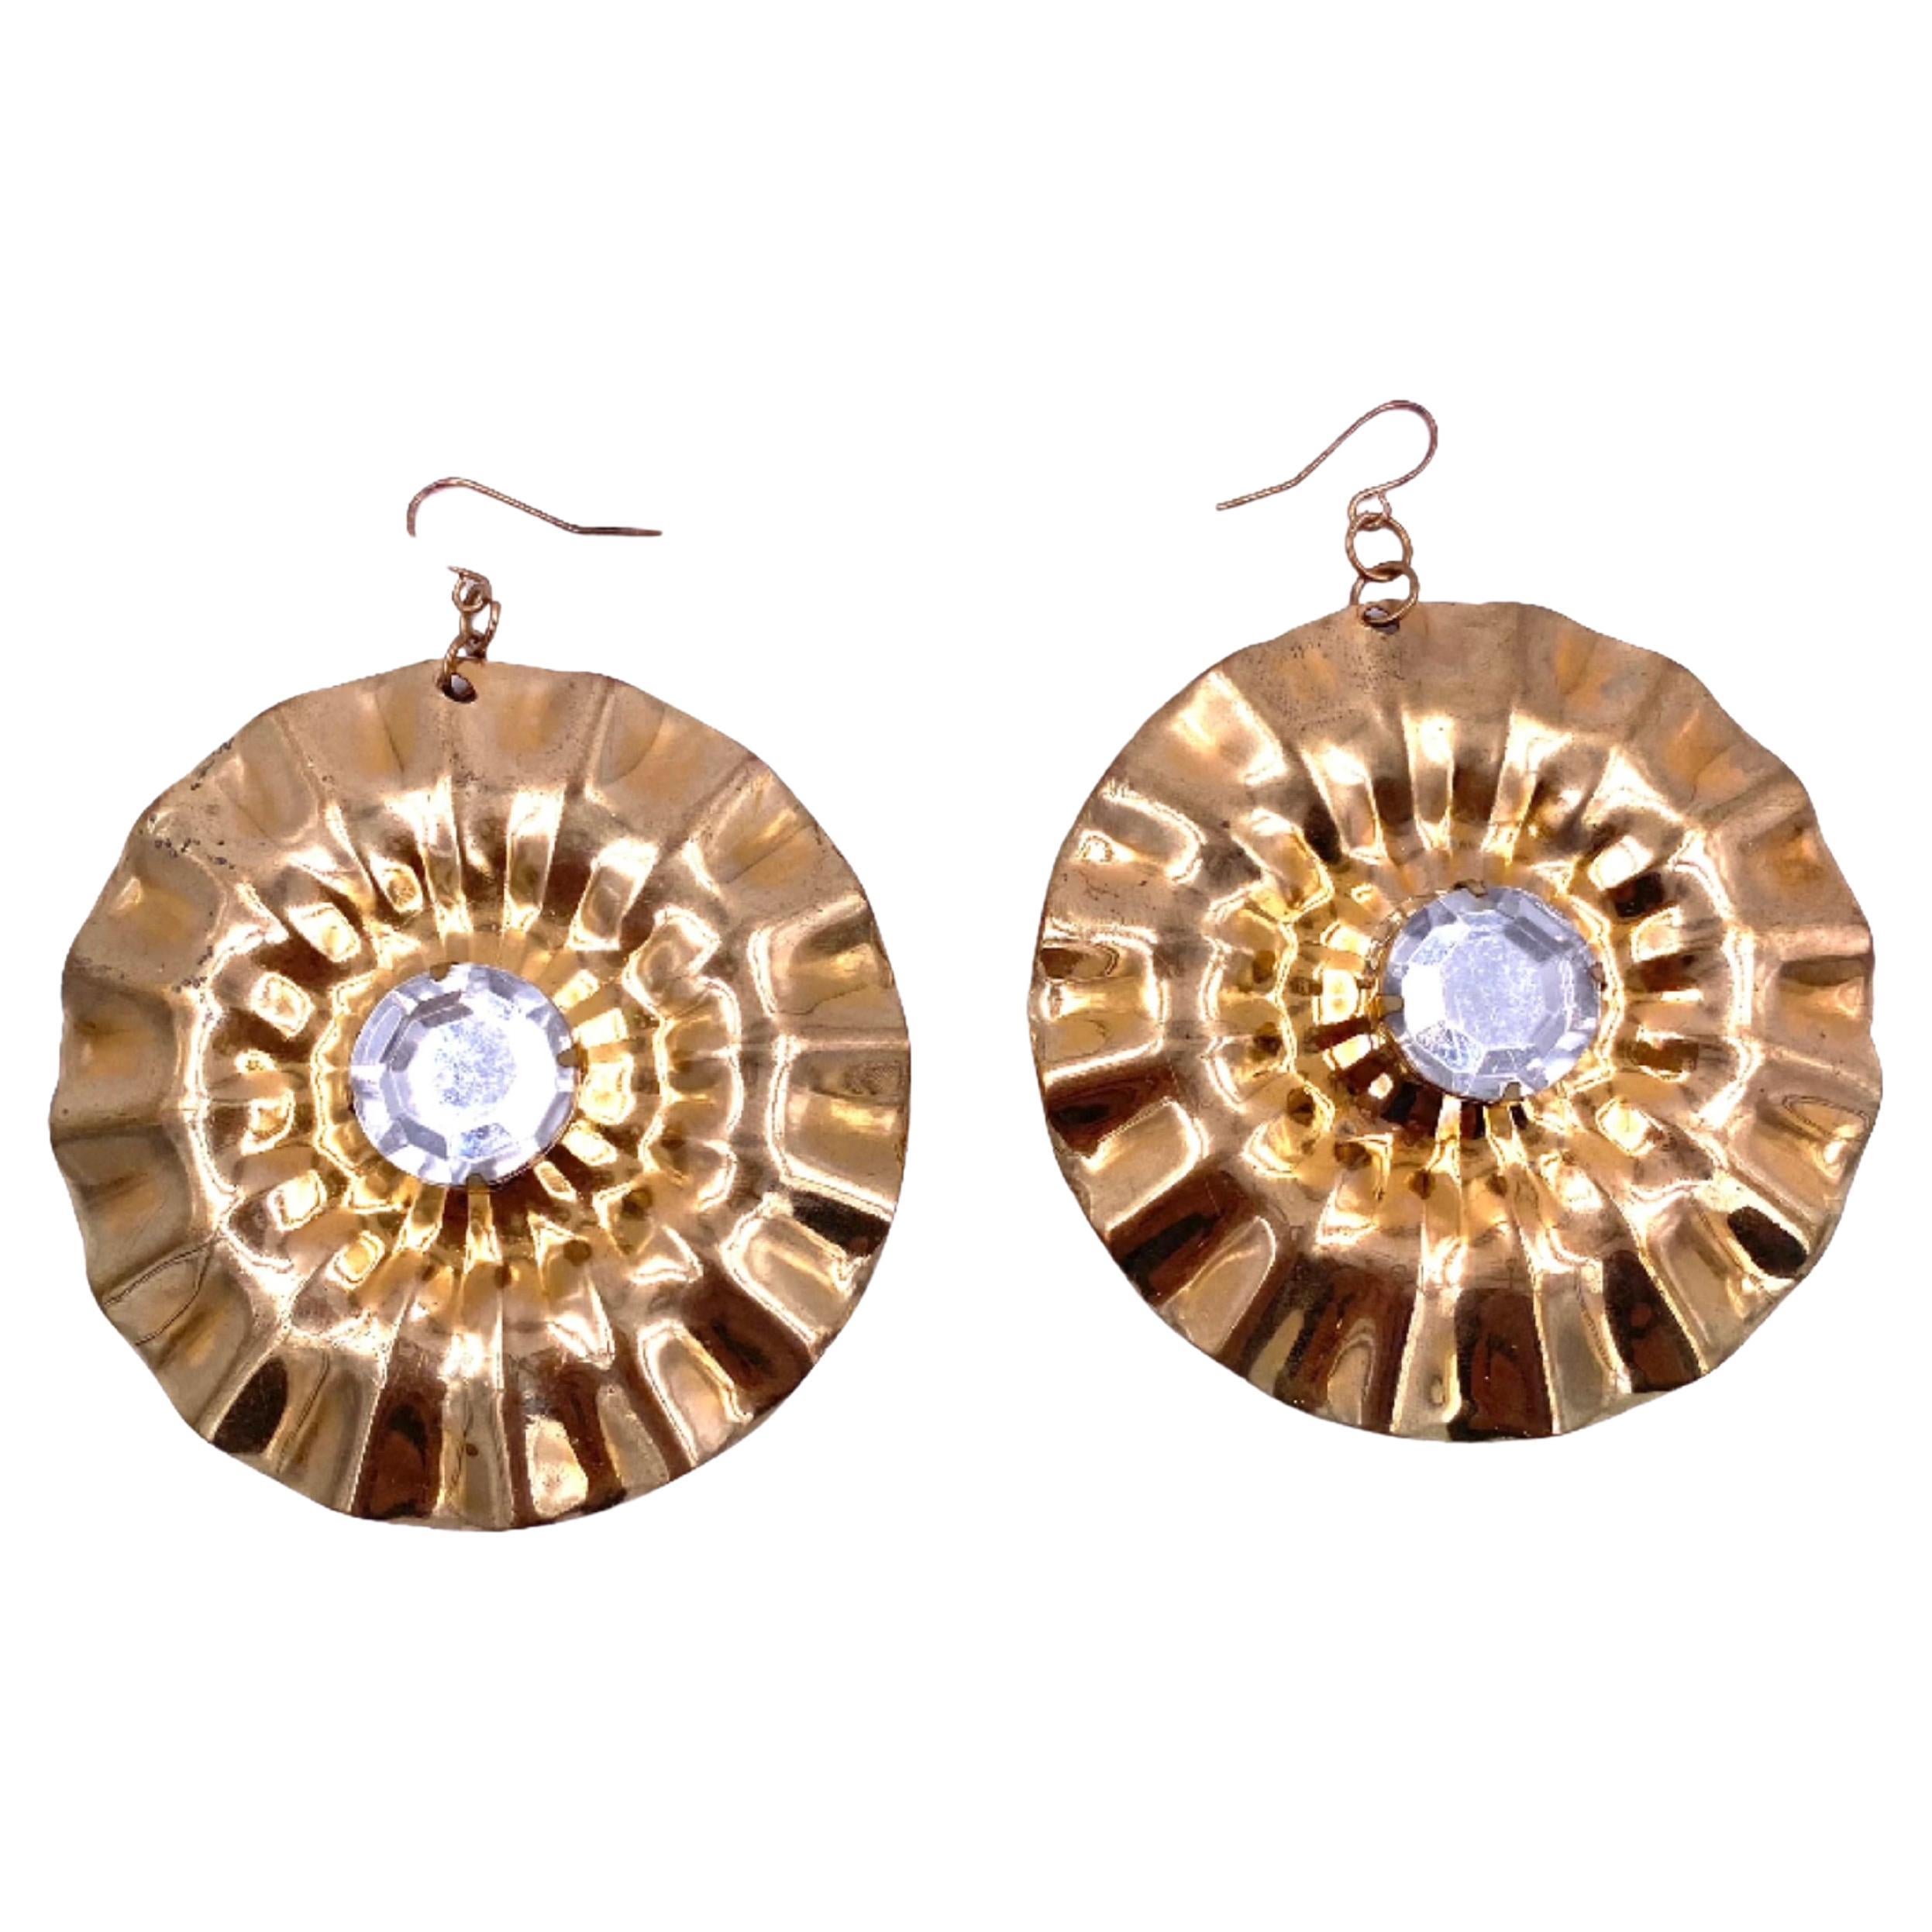 Vintage Large Round Gold Earrings with Large Center Crystal For Sale